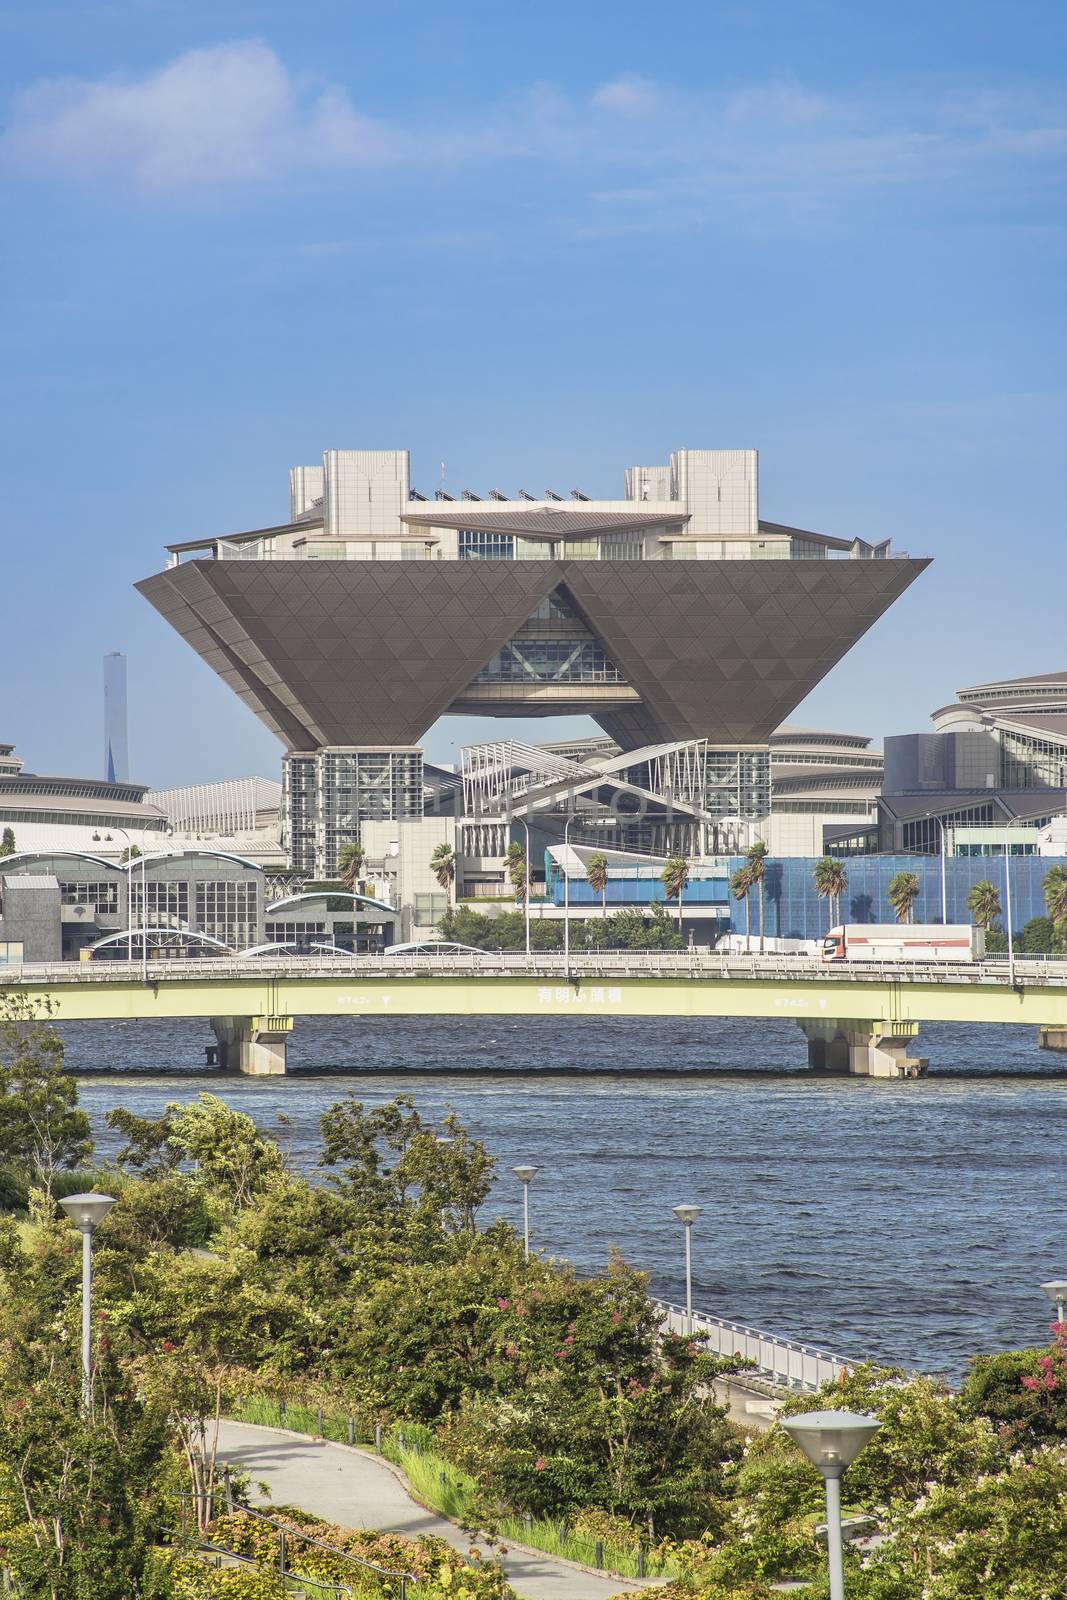 The Tokyo International Exhibition Center more commonly called Tokyo Big Sight is a palace of congresses located in Tokyo Japan. In the summer blue sky its very particular shape gives it a UFO appearance.